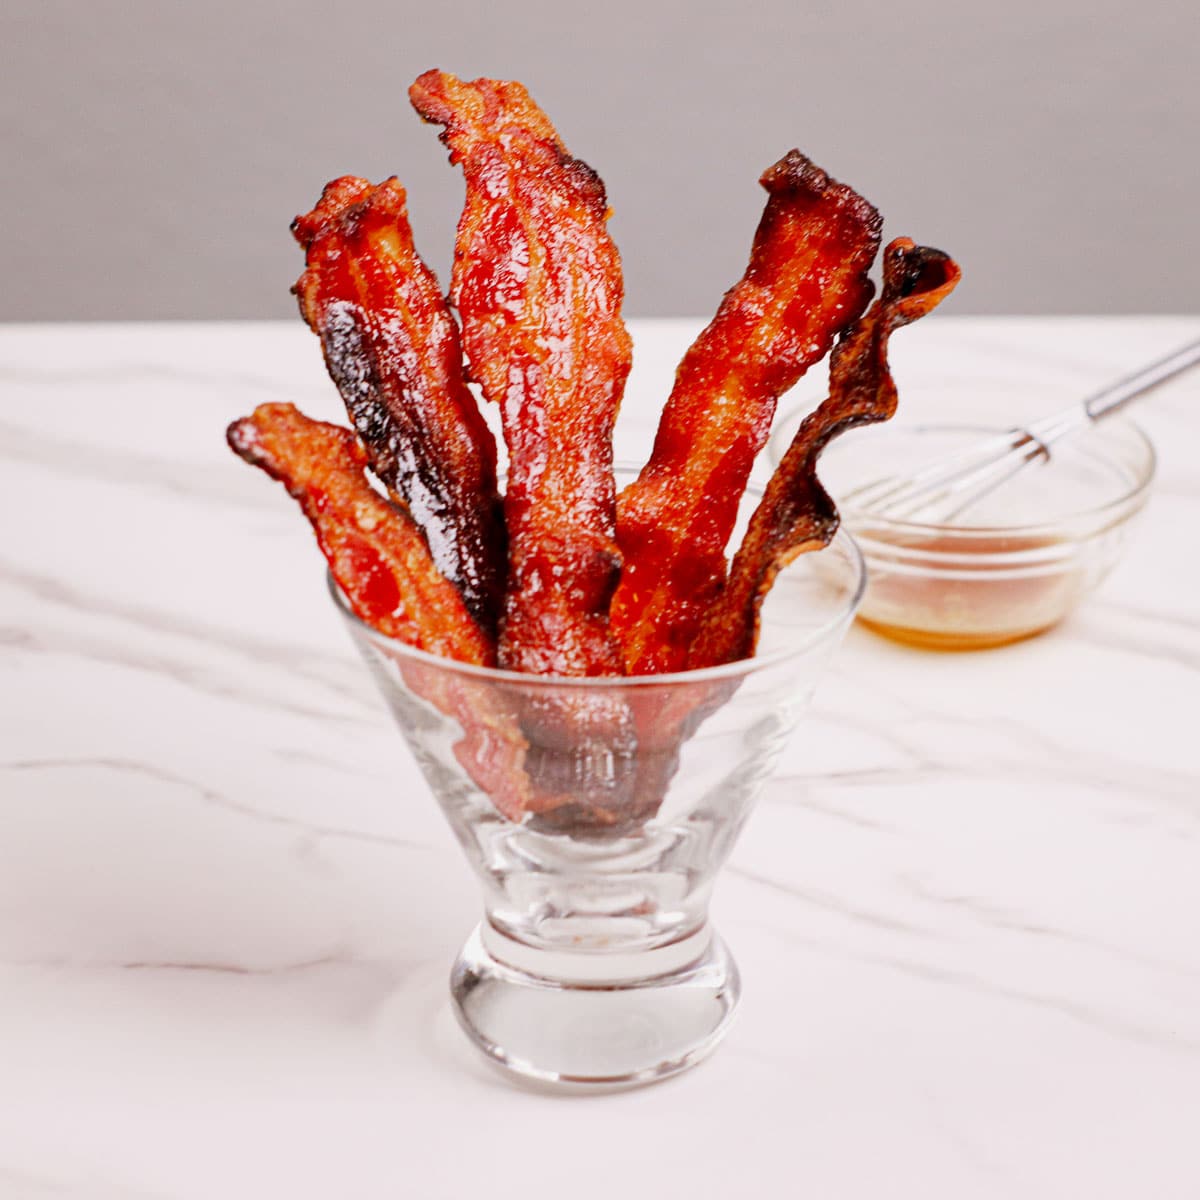 Air fried candied bacon served in a cocktail glass.